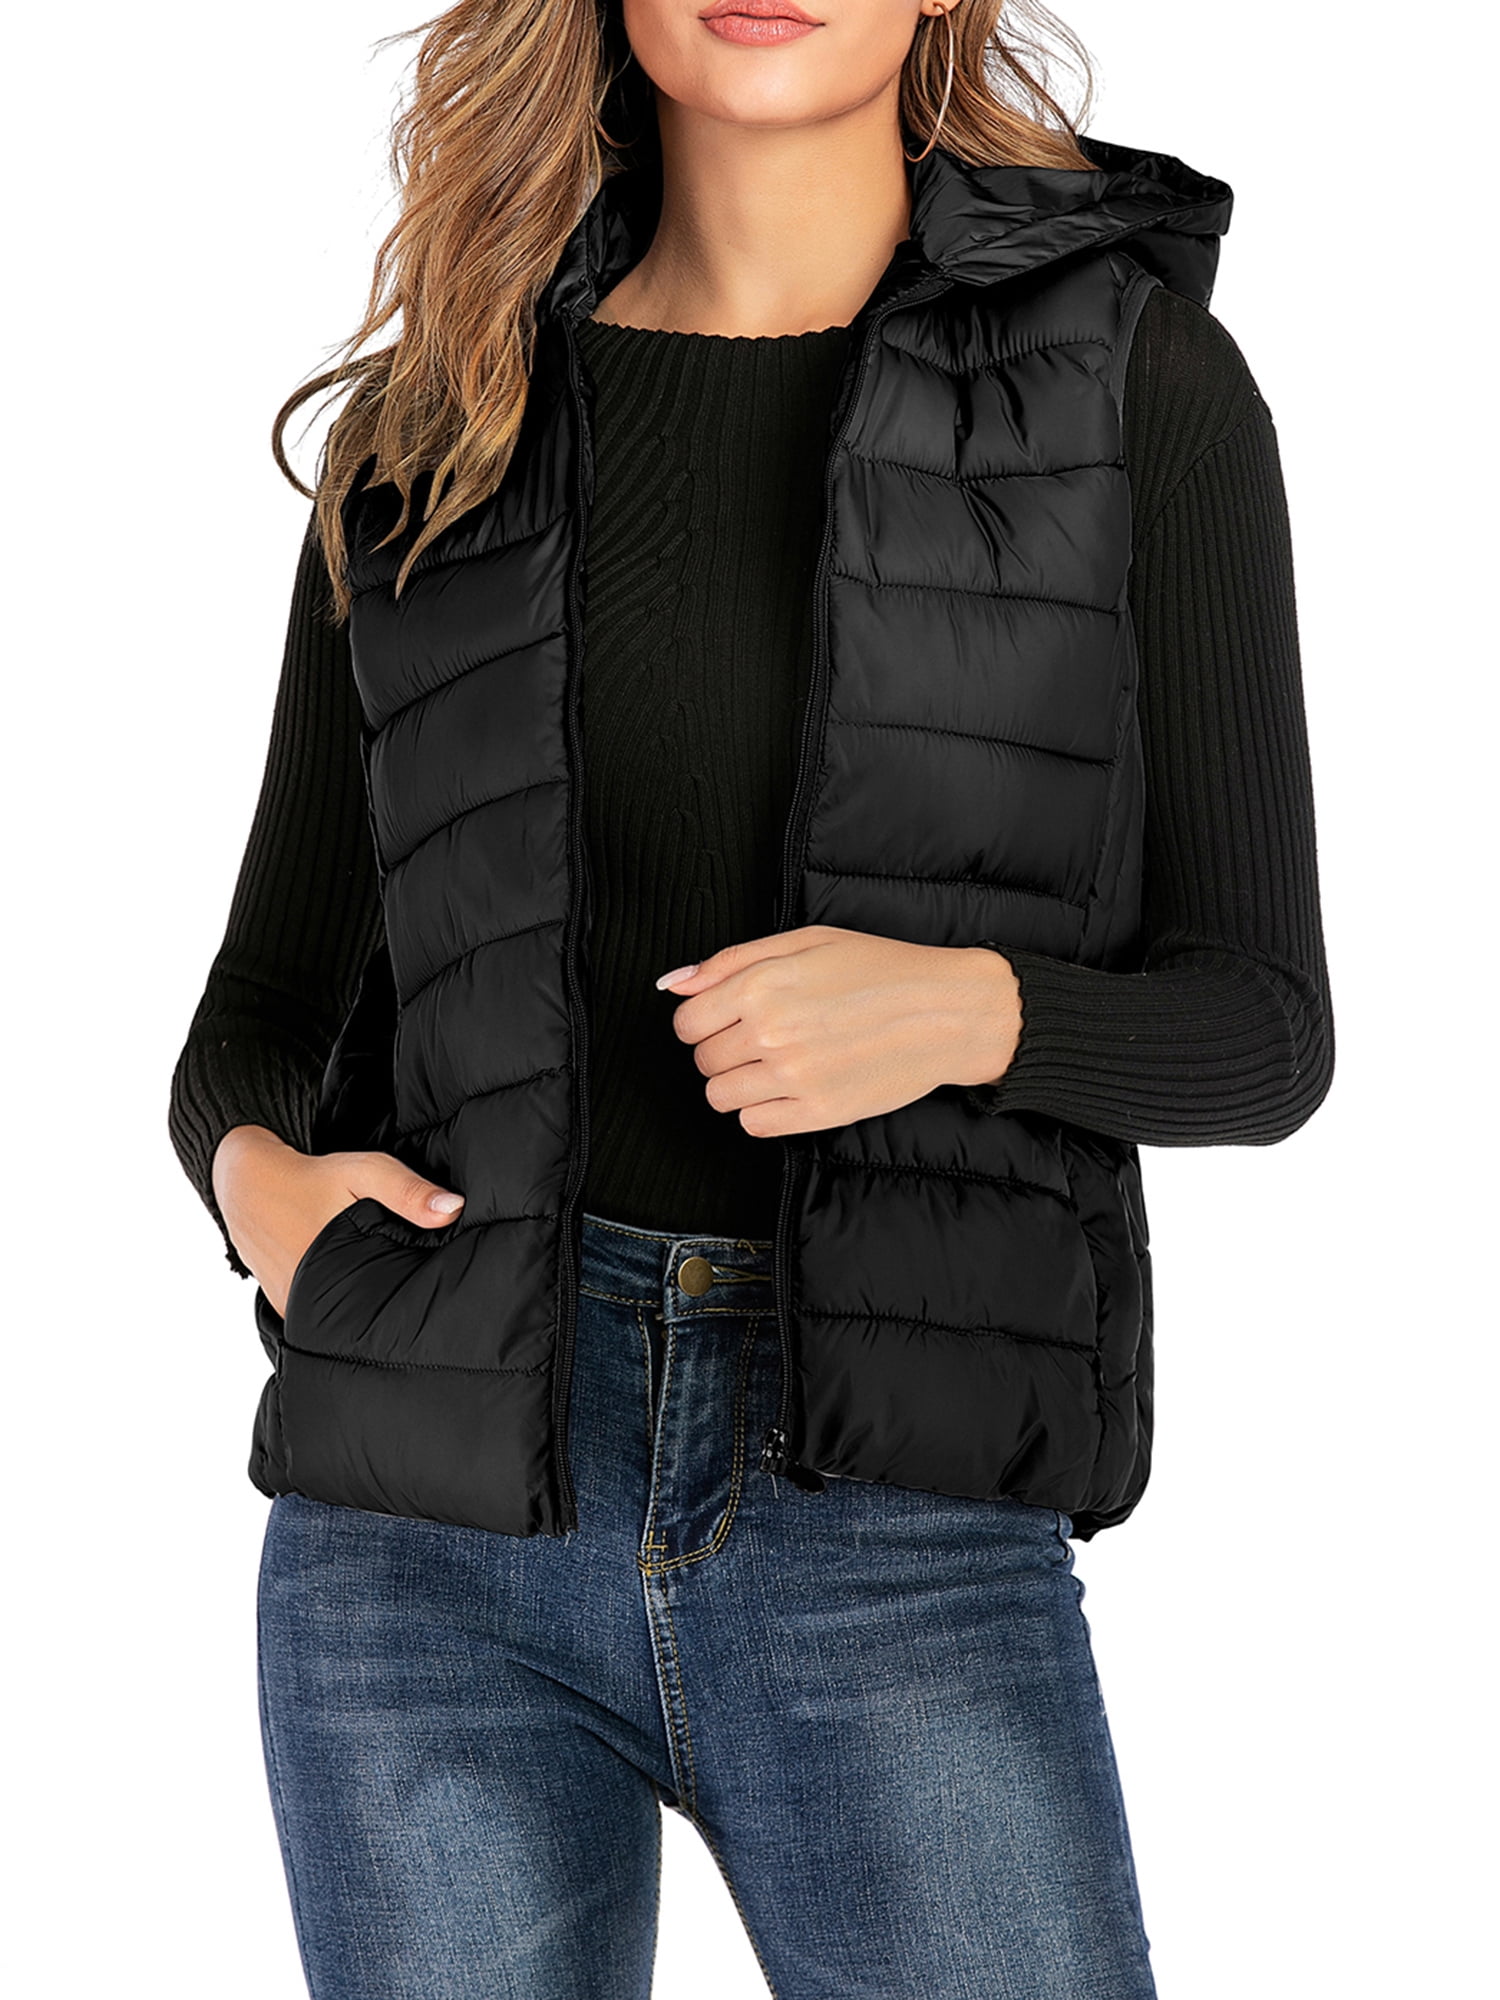 FrostFree Puffer Vest For Women Vest outfits for women, Trendy clothes ...